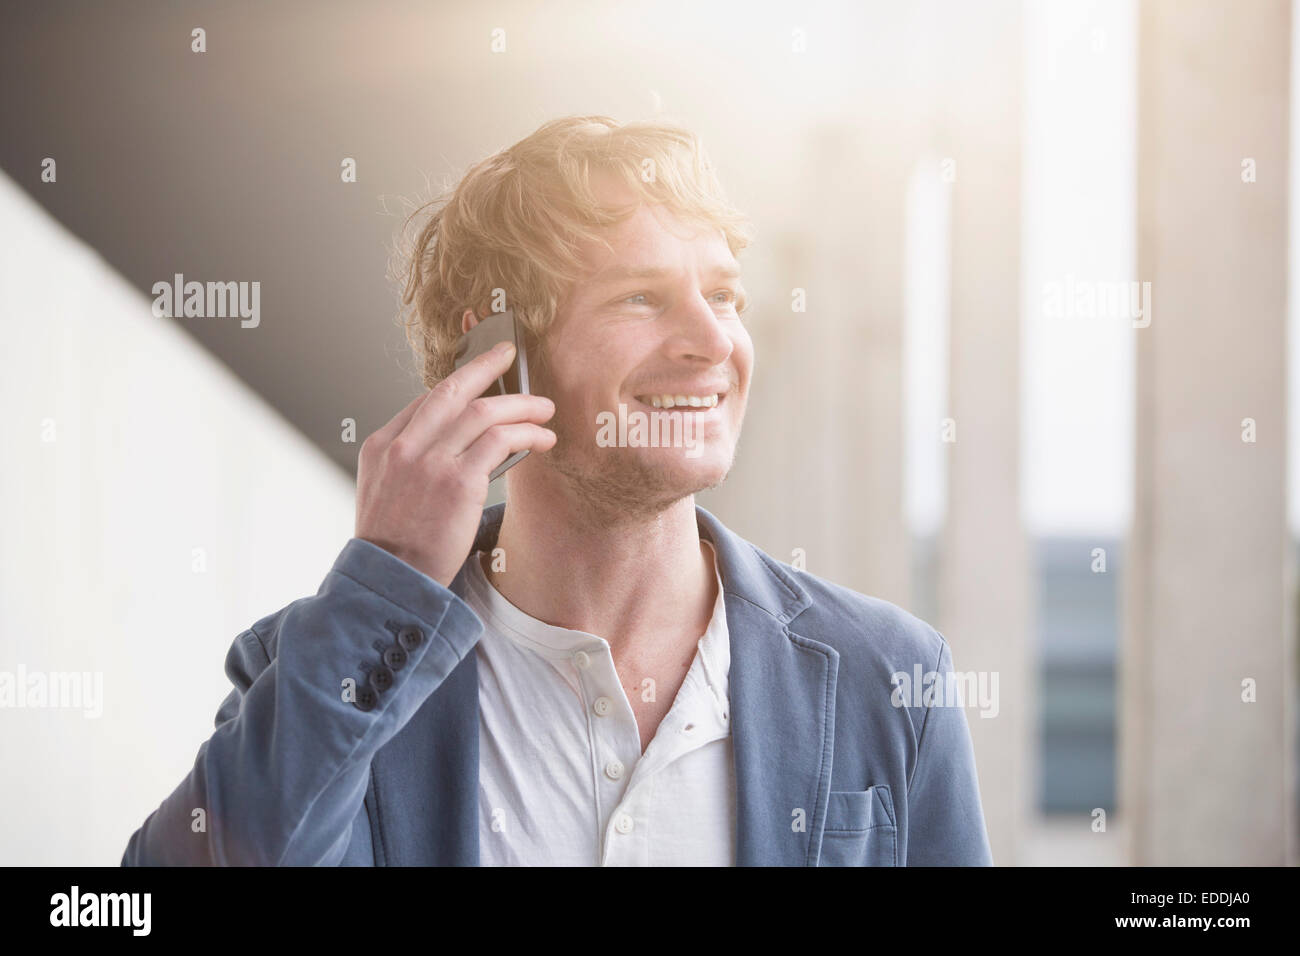 Portrait of smiling man telephoning with smartphone at backlight Stock Photo